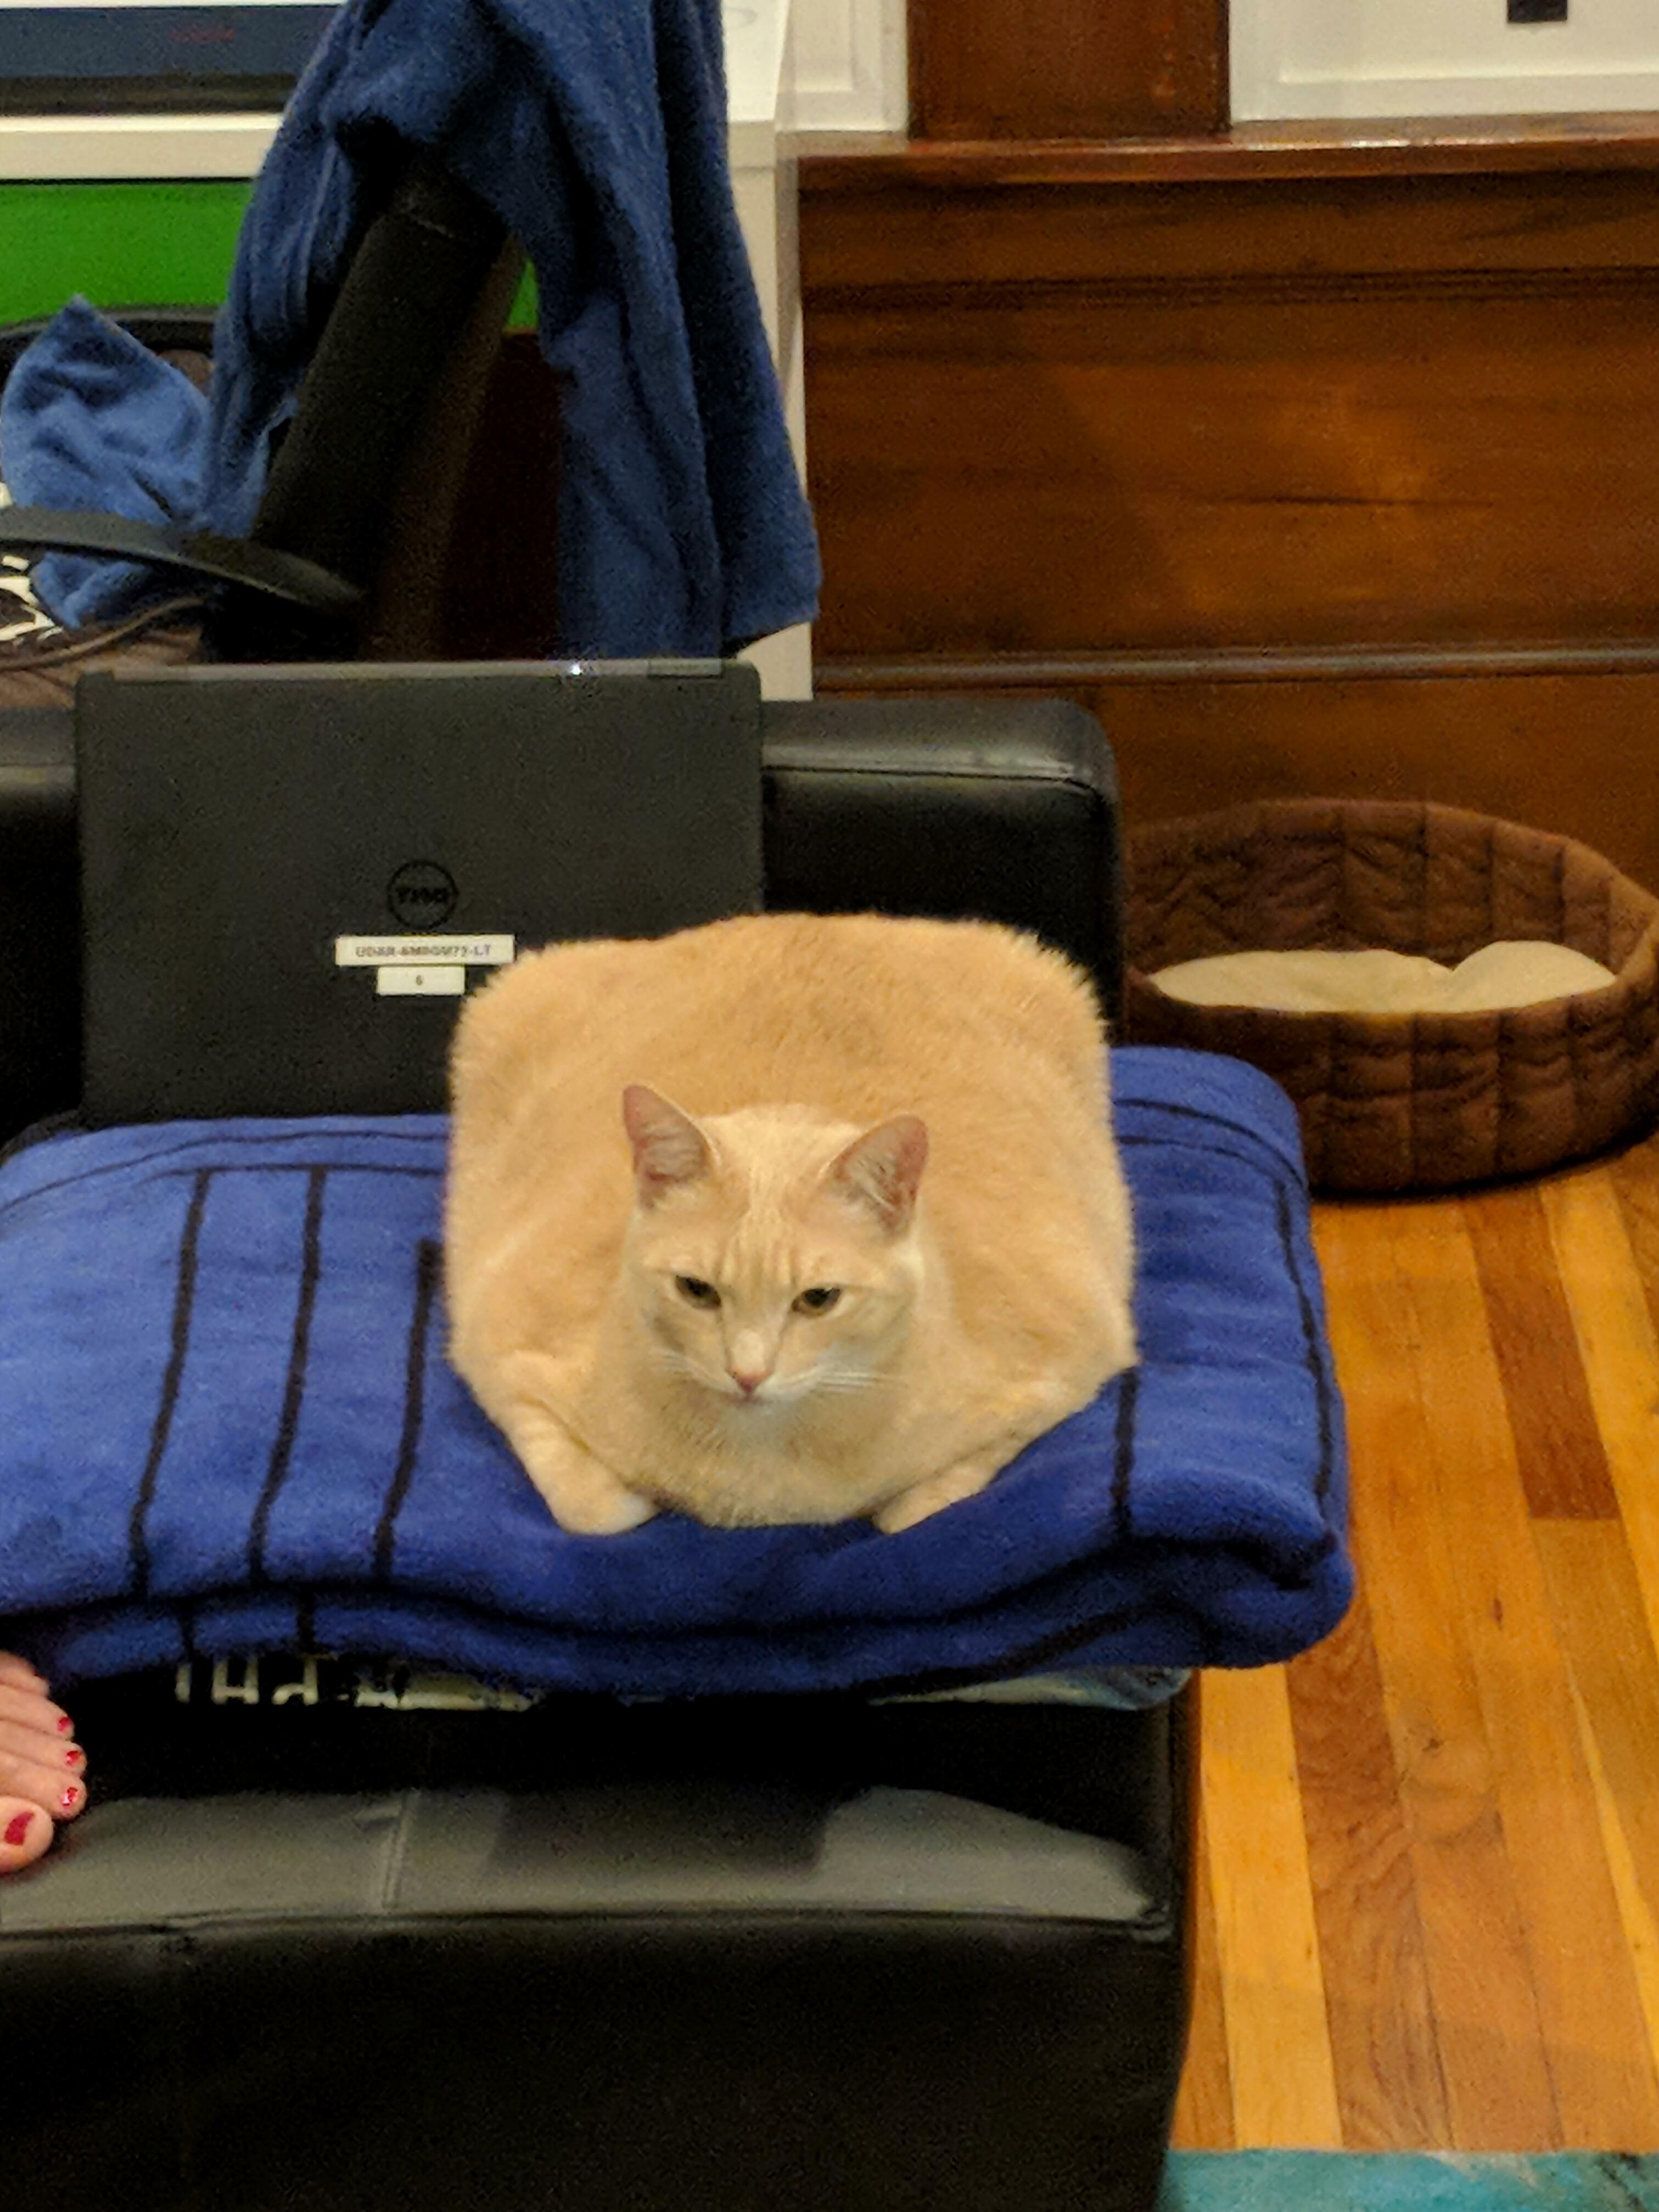 From the creators of the cat loaf, i present to you…the cat waffle